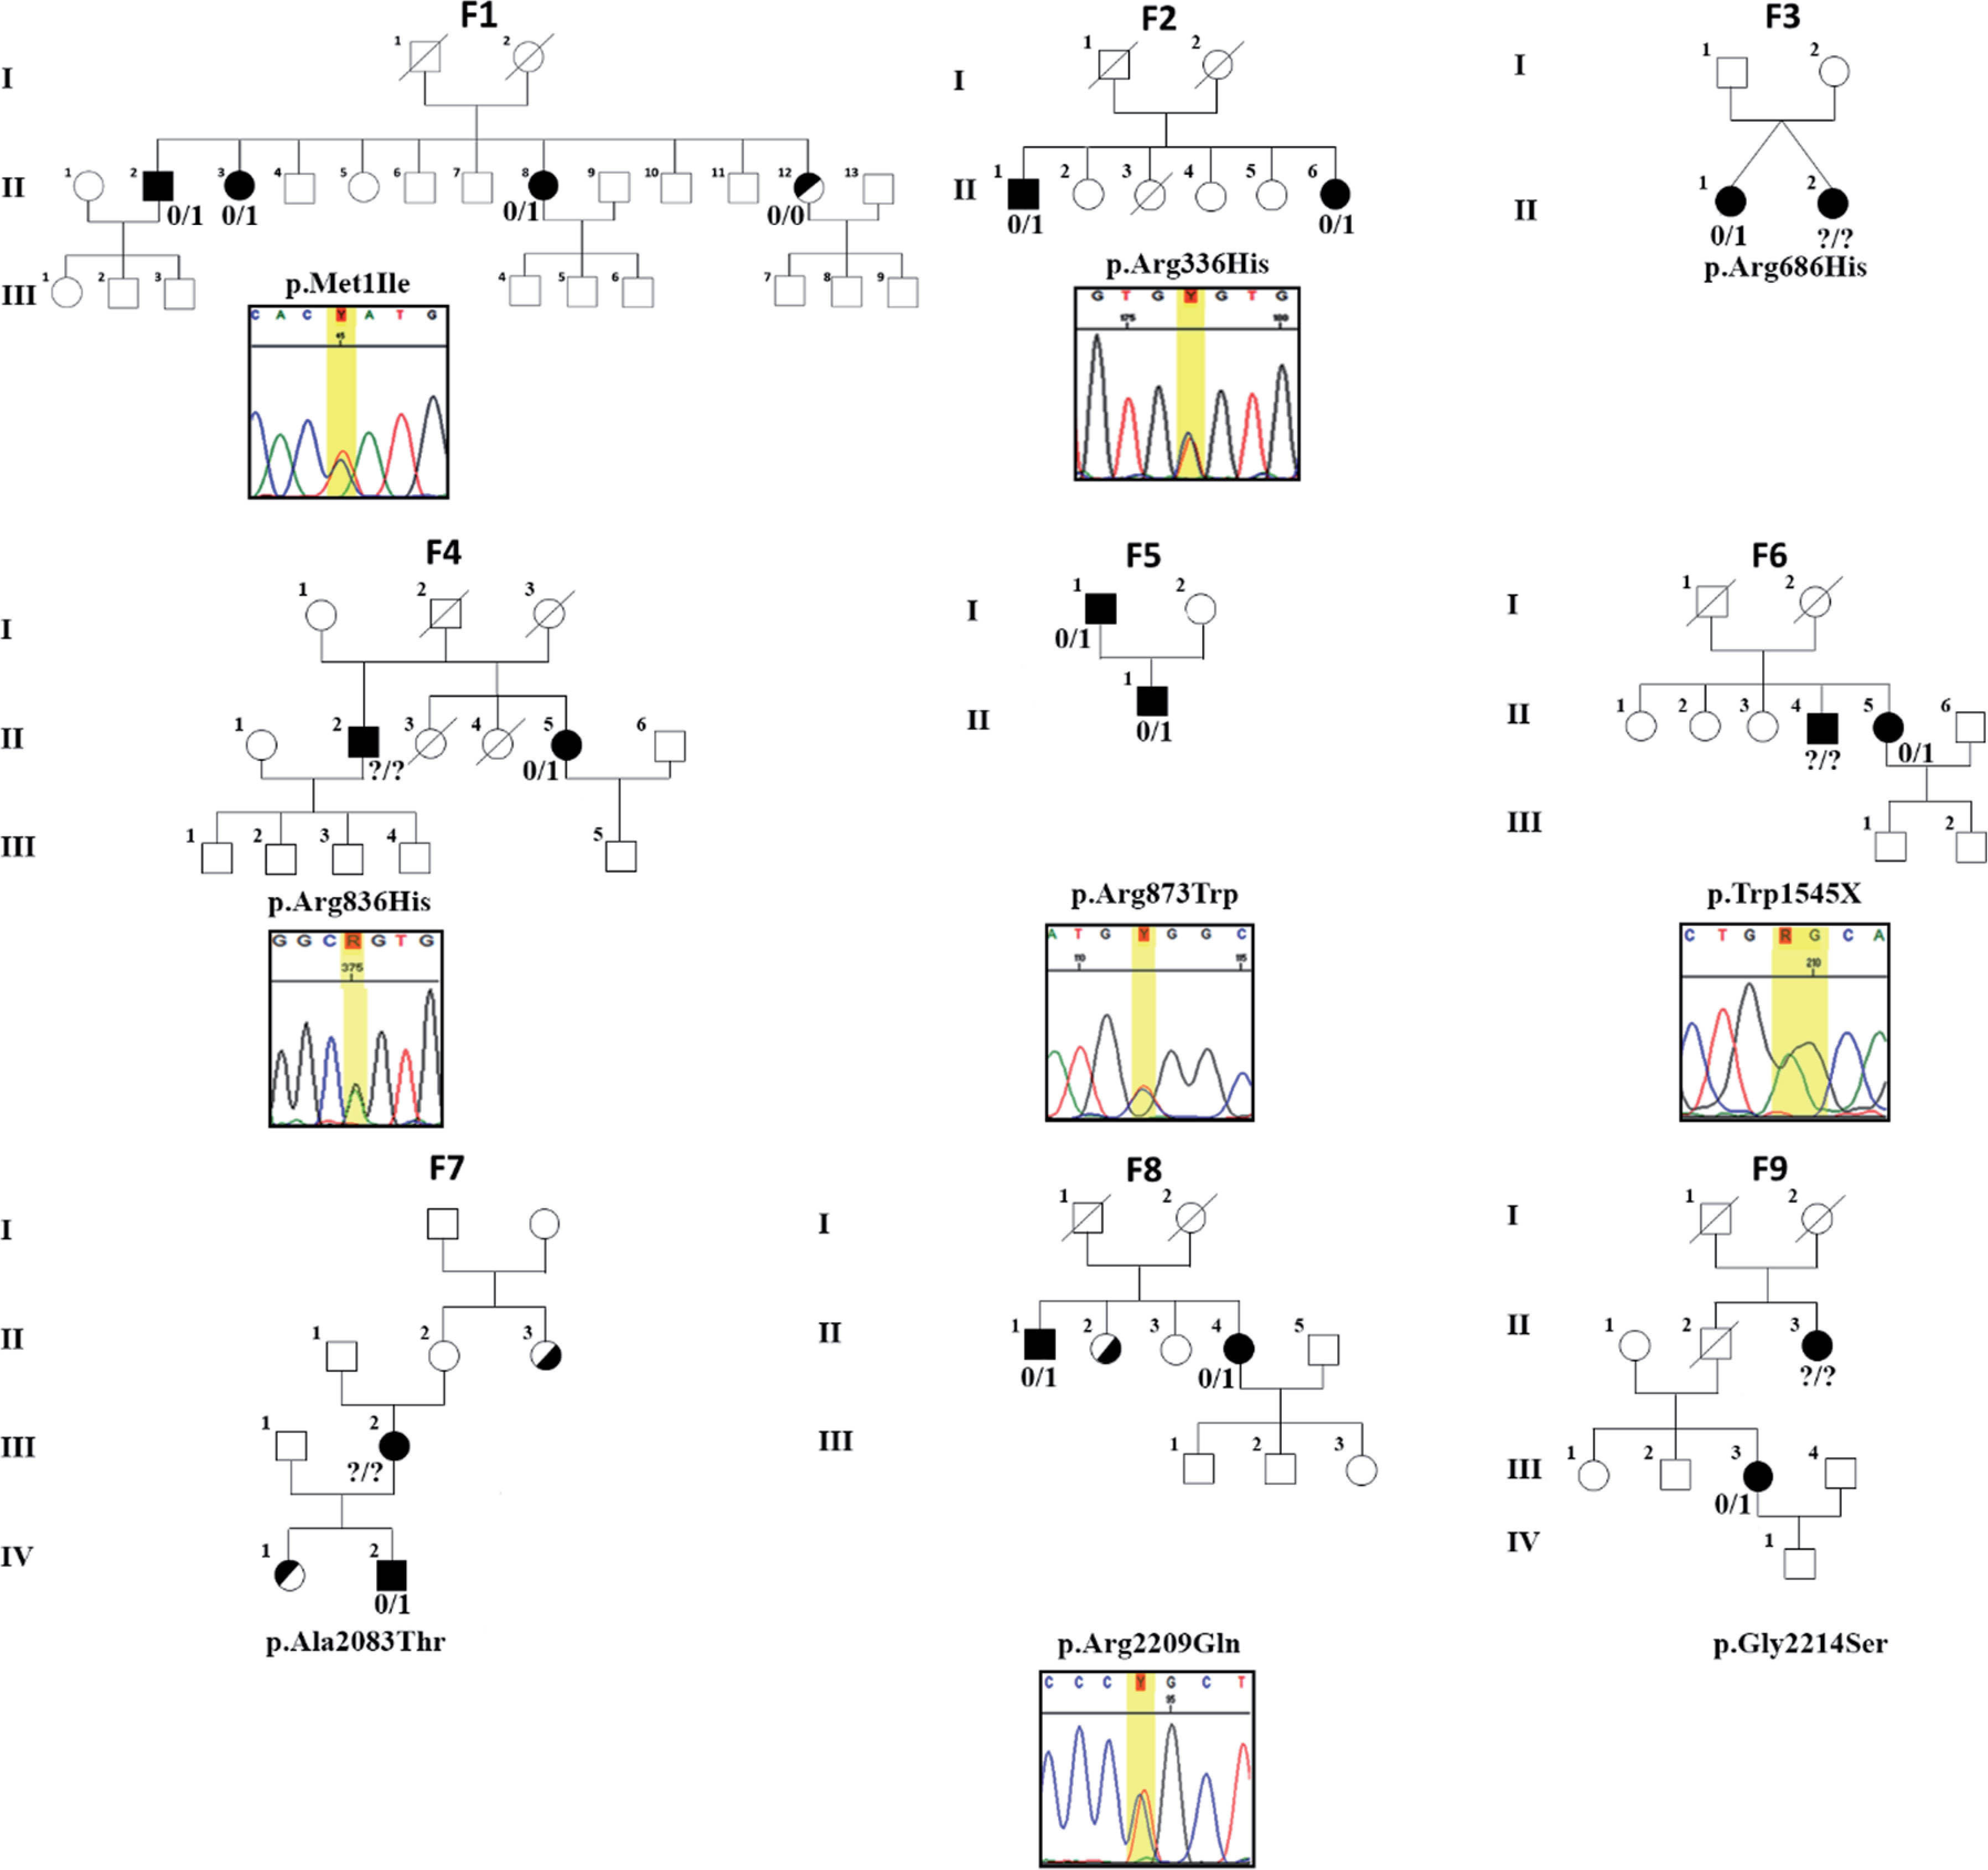 Nine MD families carrying rare variants in the MYO7A gene. Variants in MYO7A found in this study indicated by protein nomenclature and Sanger sequencing chromatograms are displayed under each family. Solid squares (male) and circles (female) indicate patients with definite MD. Those patients with only vertigo or hearing loss are indicated, respectively, with the upper or the lower half of their symbols filled. “0/1”: heterozygous variant. “0/0”: homozygous for the reference allele. “?/?”: Sample not available.